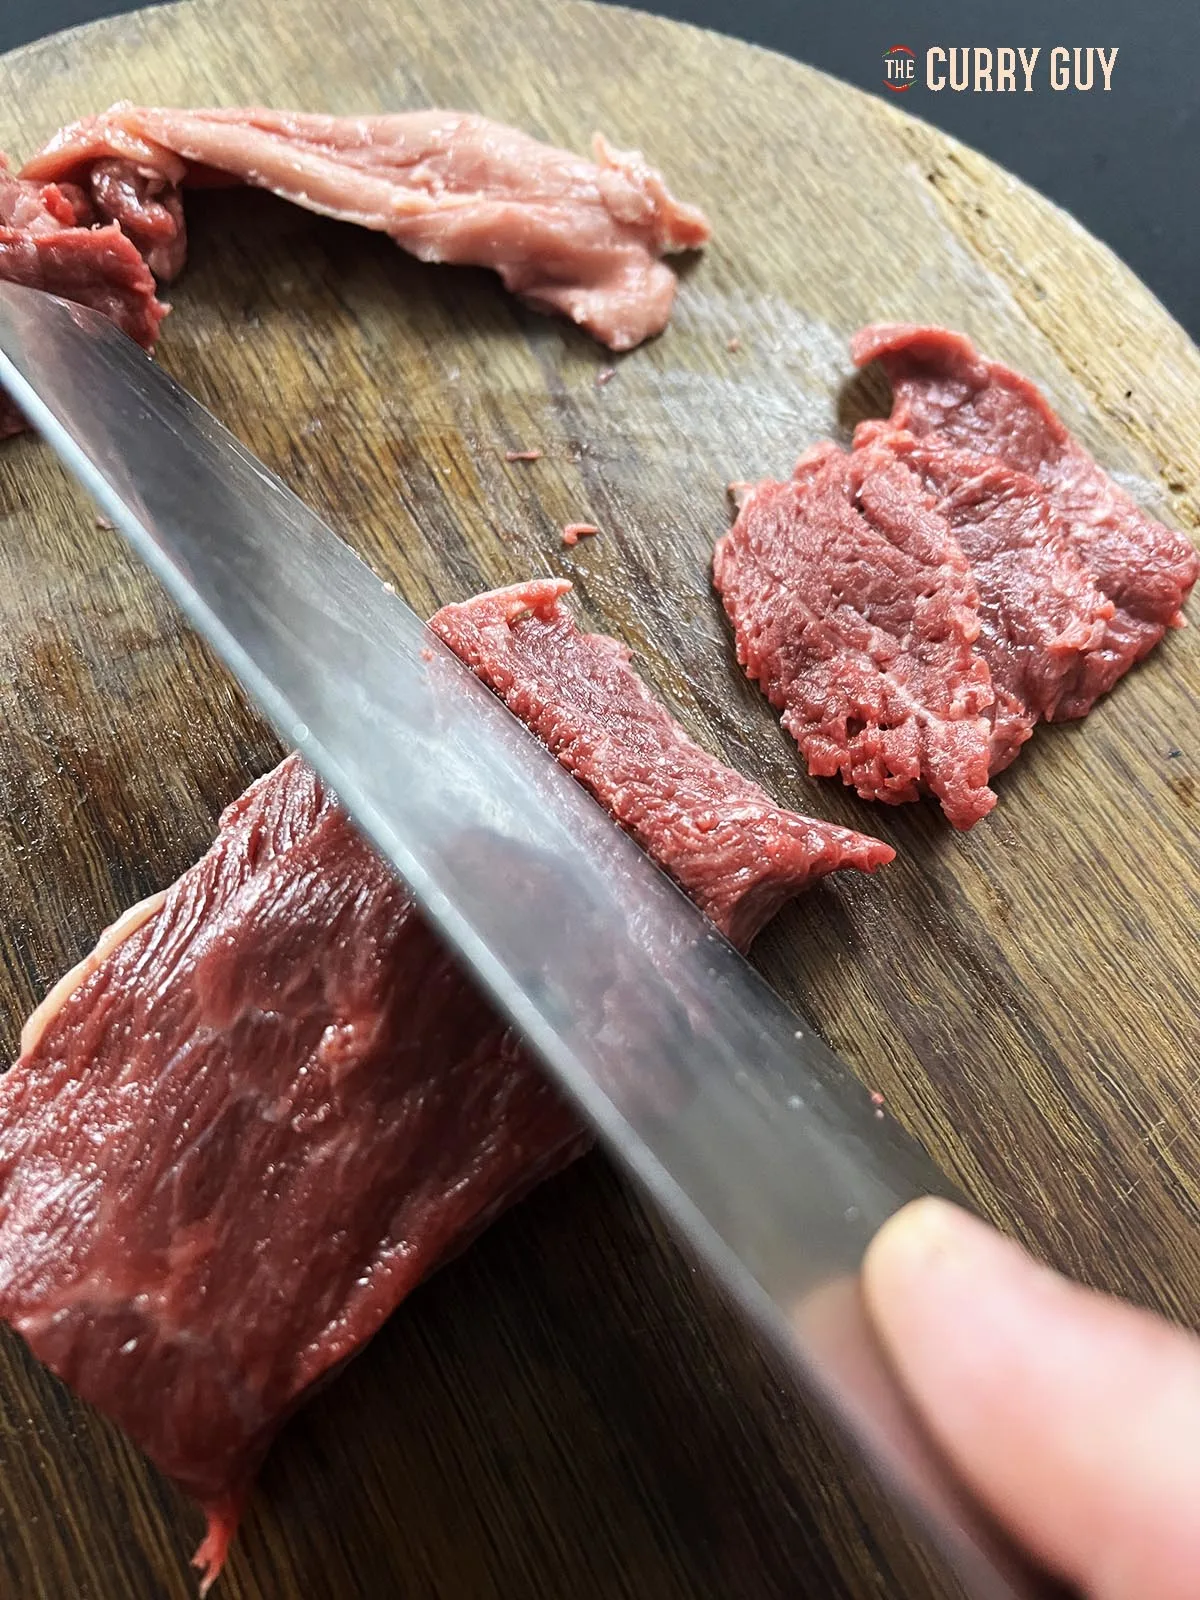 Slicing meat against the grain.